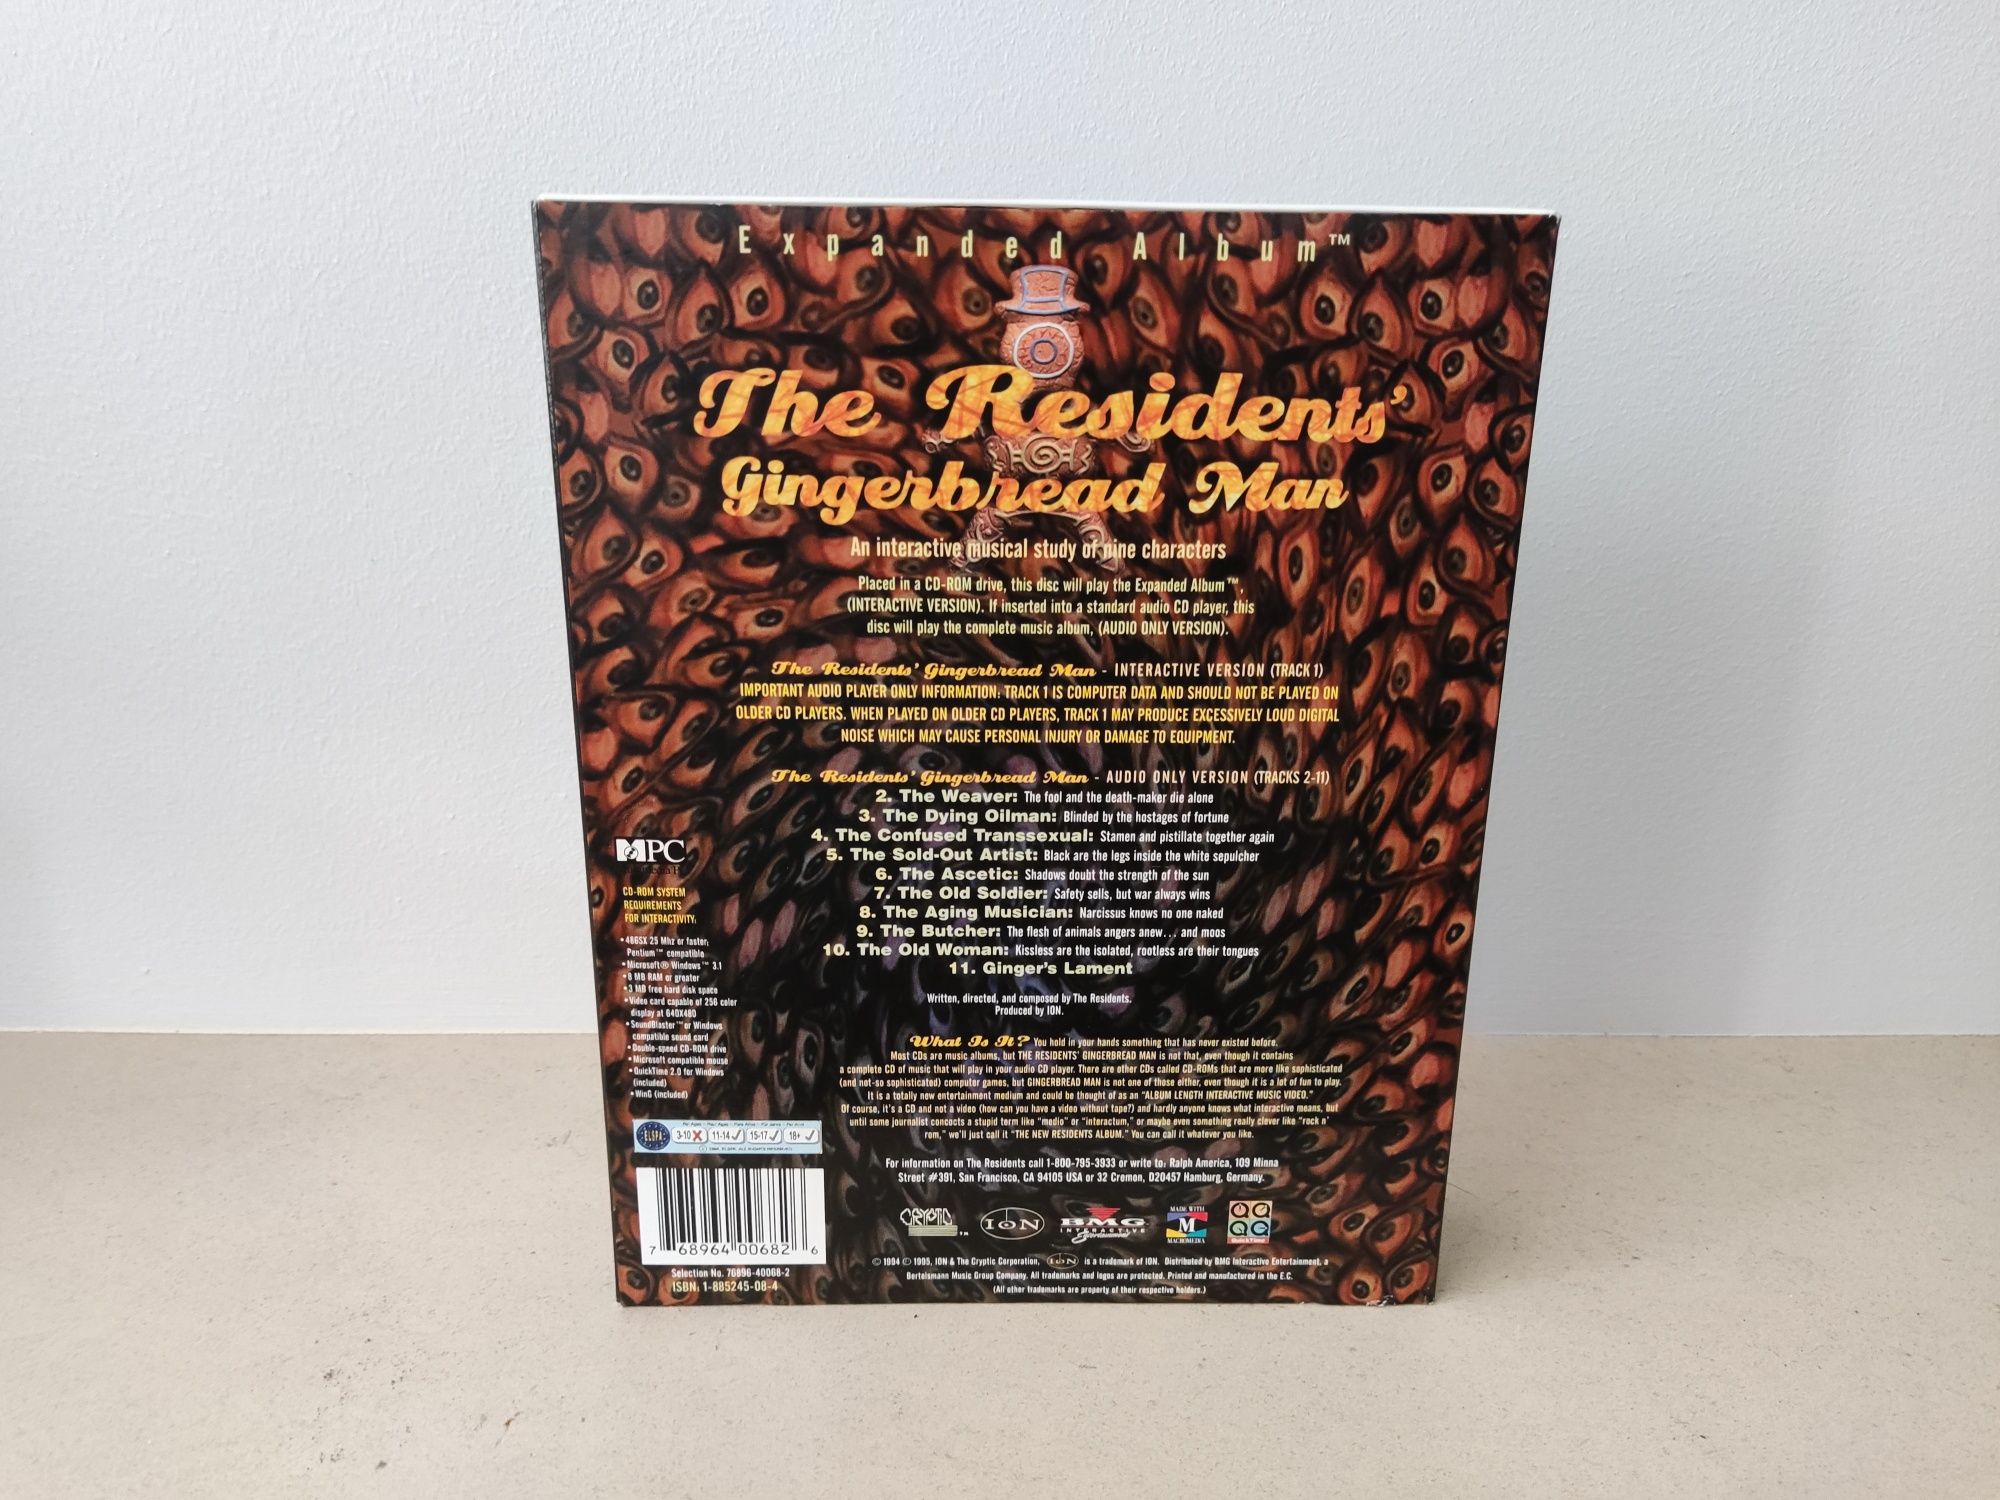 The Residents - Gingerbread Man (expanded album) - 1995 (NOVO)